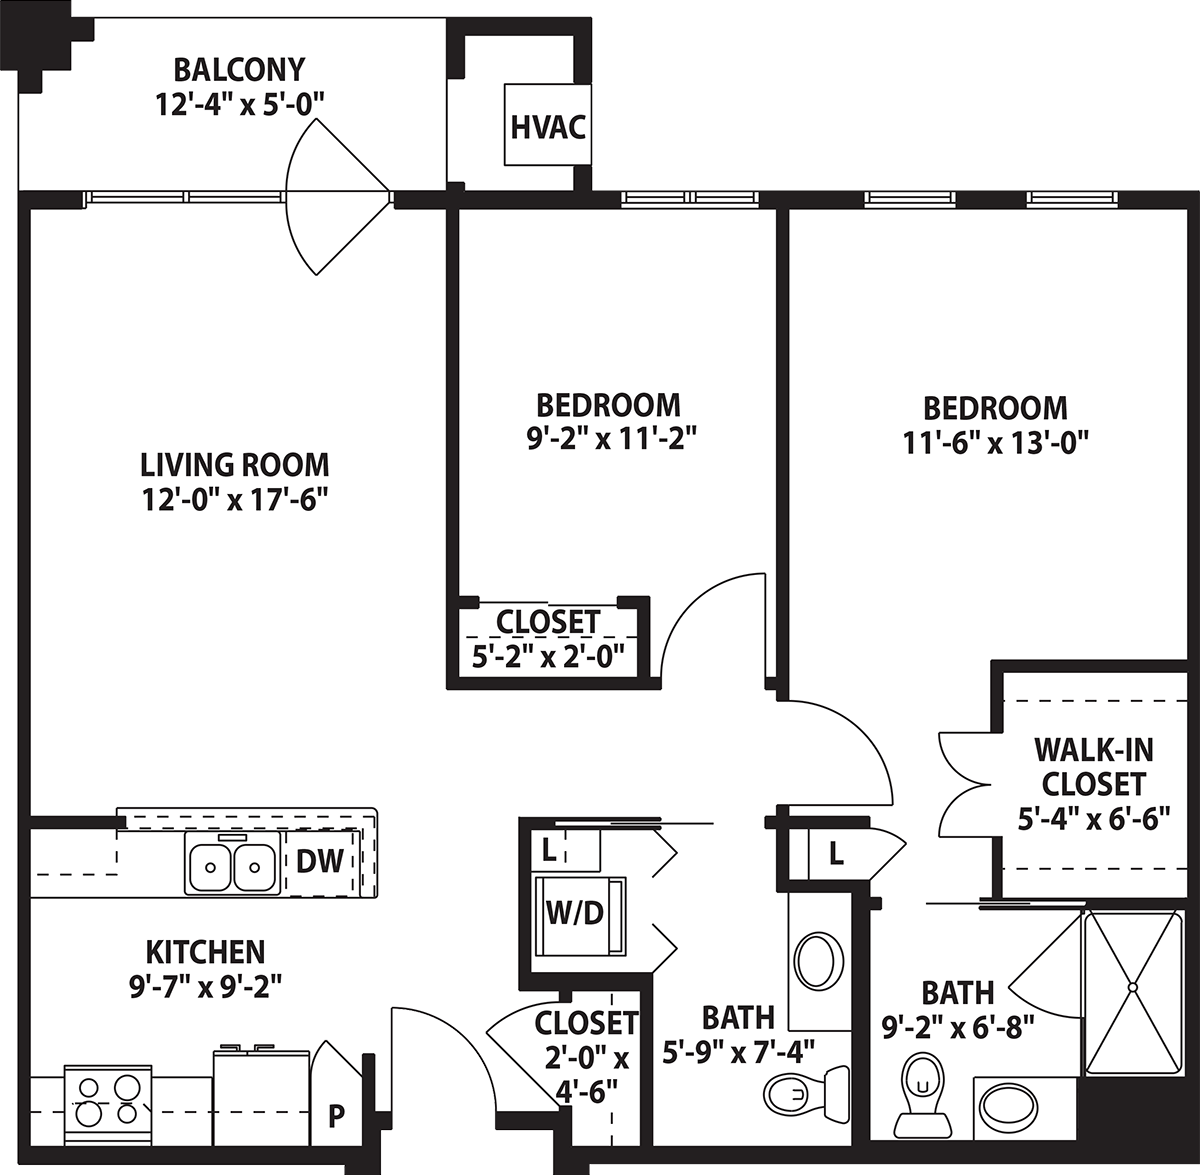 Interactive map of the Hynsdale floor plan that includes pop-up images of the interior